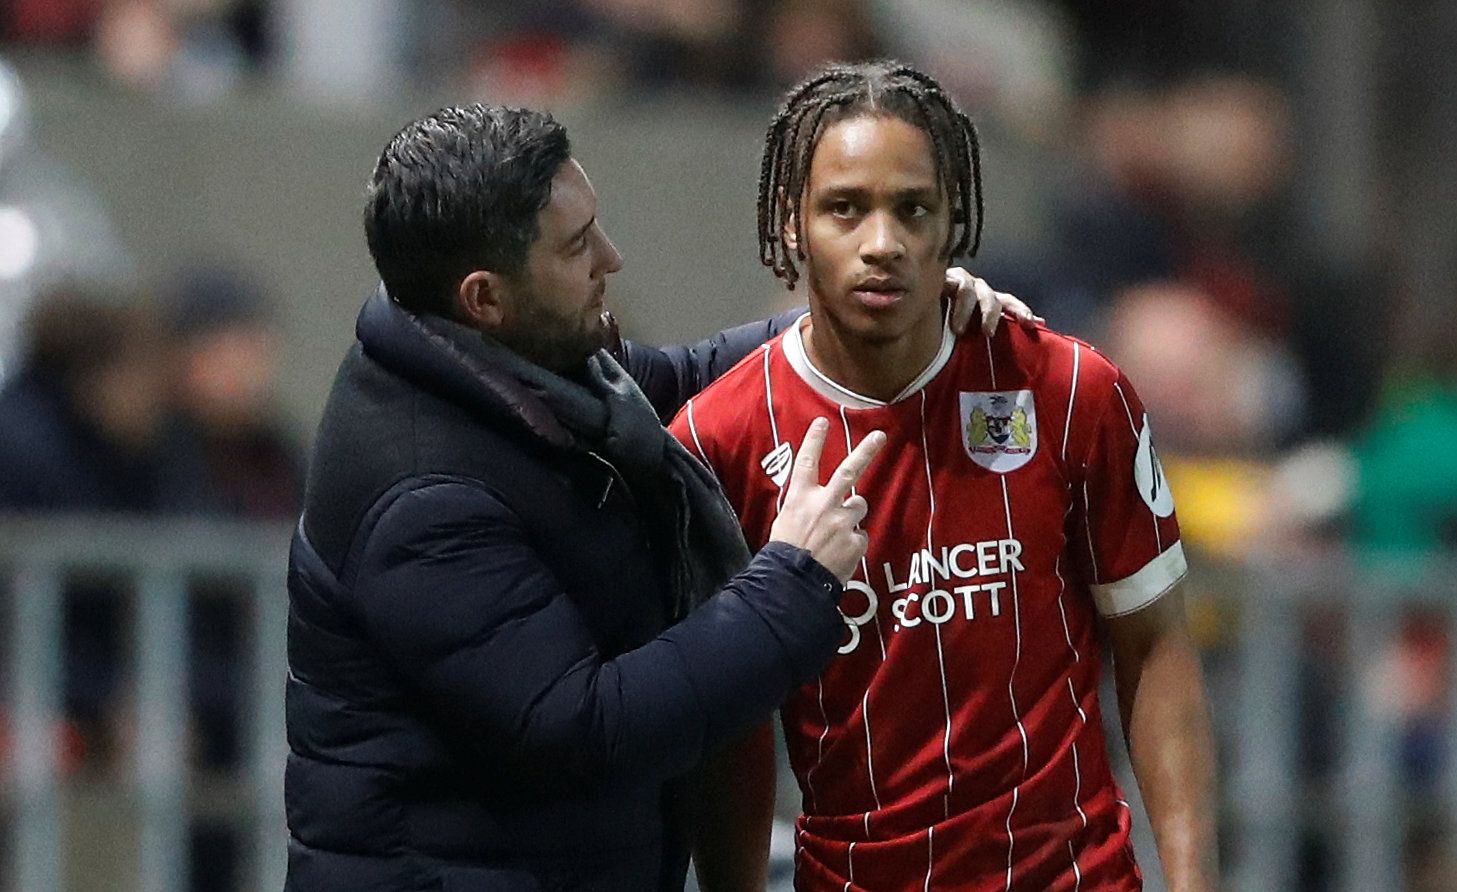 Soccer Football - Carabao Cup Semi Final Second Leg - Bristol City vs Manchester City - Ashton Gate Stadium, Bristol, Britain - January 23, 2018   Bristol City manager Lee Johnson speaks with Bobby Reid         Action Images via Reuters/Carl Recine    EDITORIAL USE ONLY. No use with unauthorized audio, video, data, fixture lists, club/league logos or 